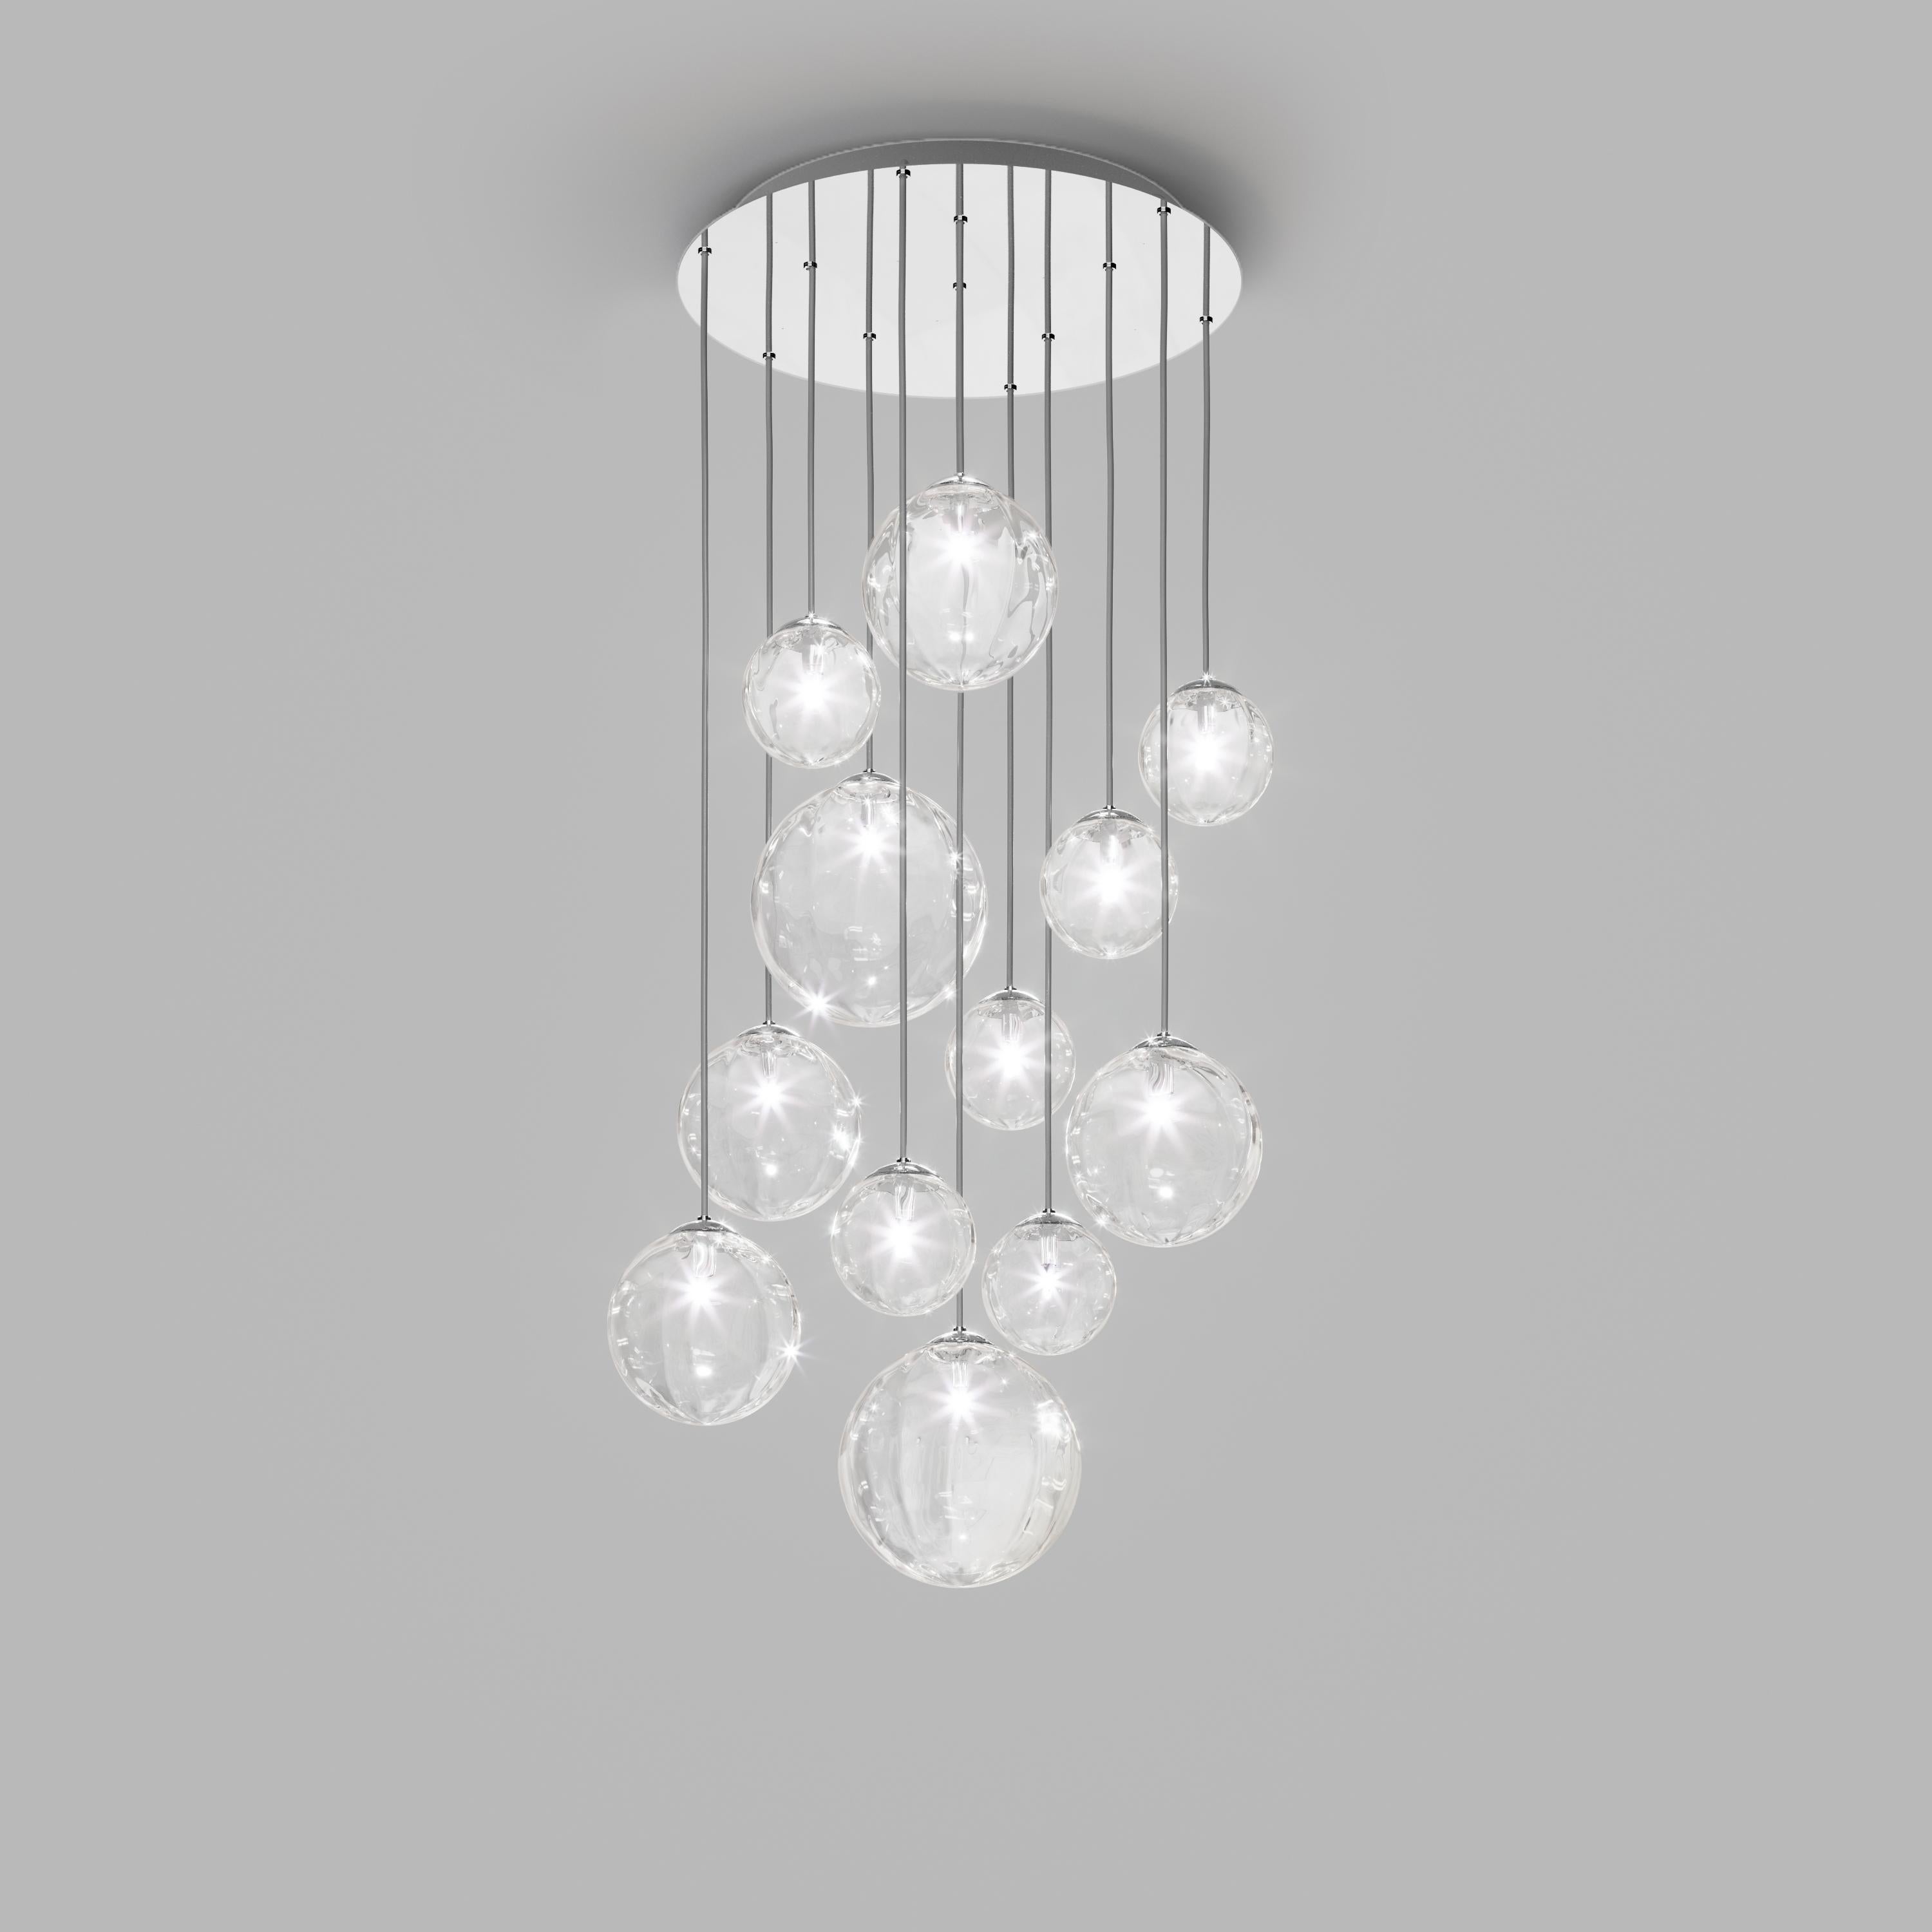 Collection of lamps with a blown and irregular striped glass diffuser. The three sizes of the spheres and the different cable heights are designed to create elegant compositions. The chandelier version allows to fix the diffusers with steel cables